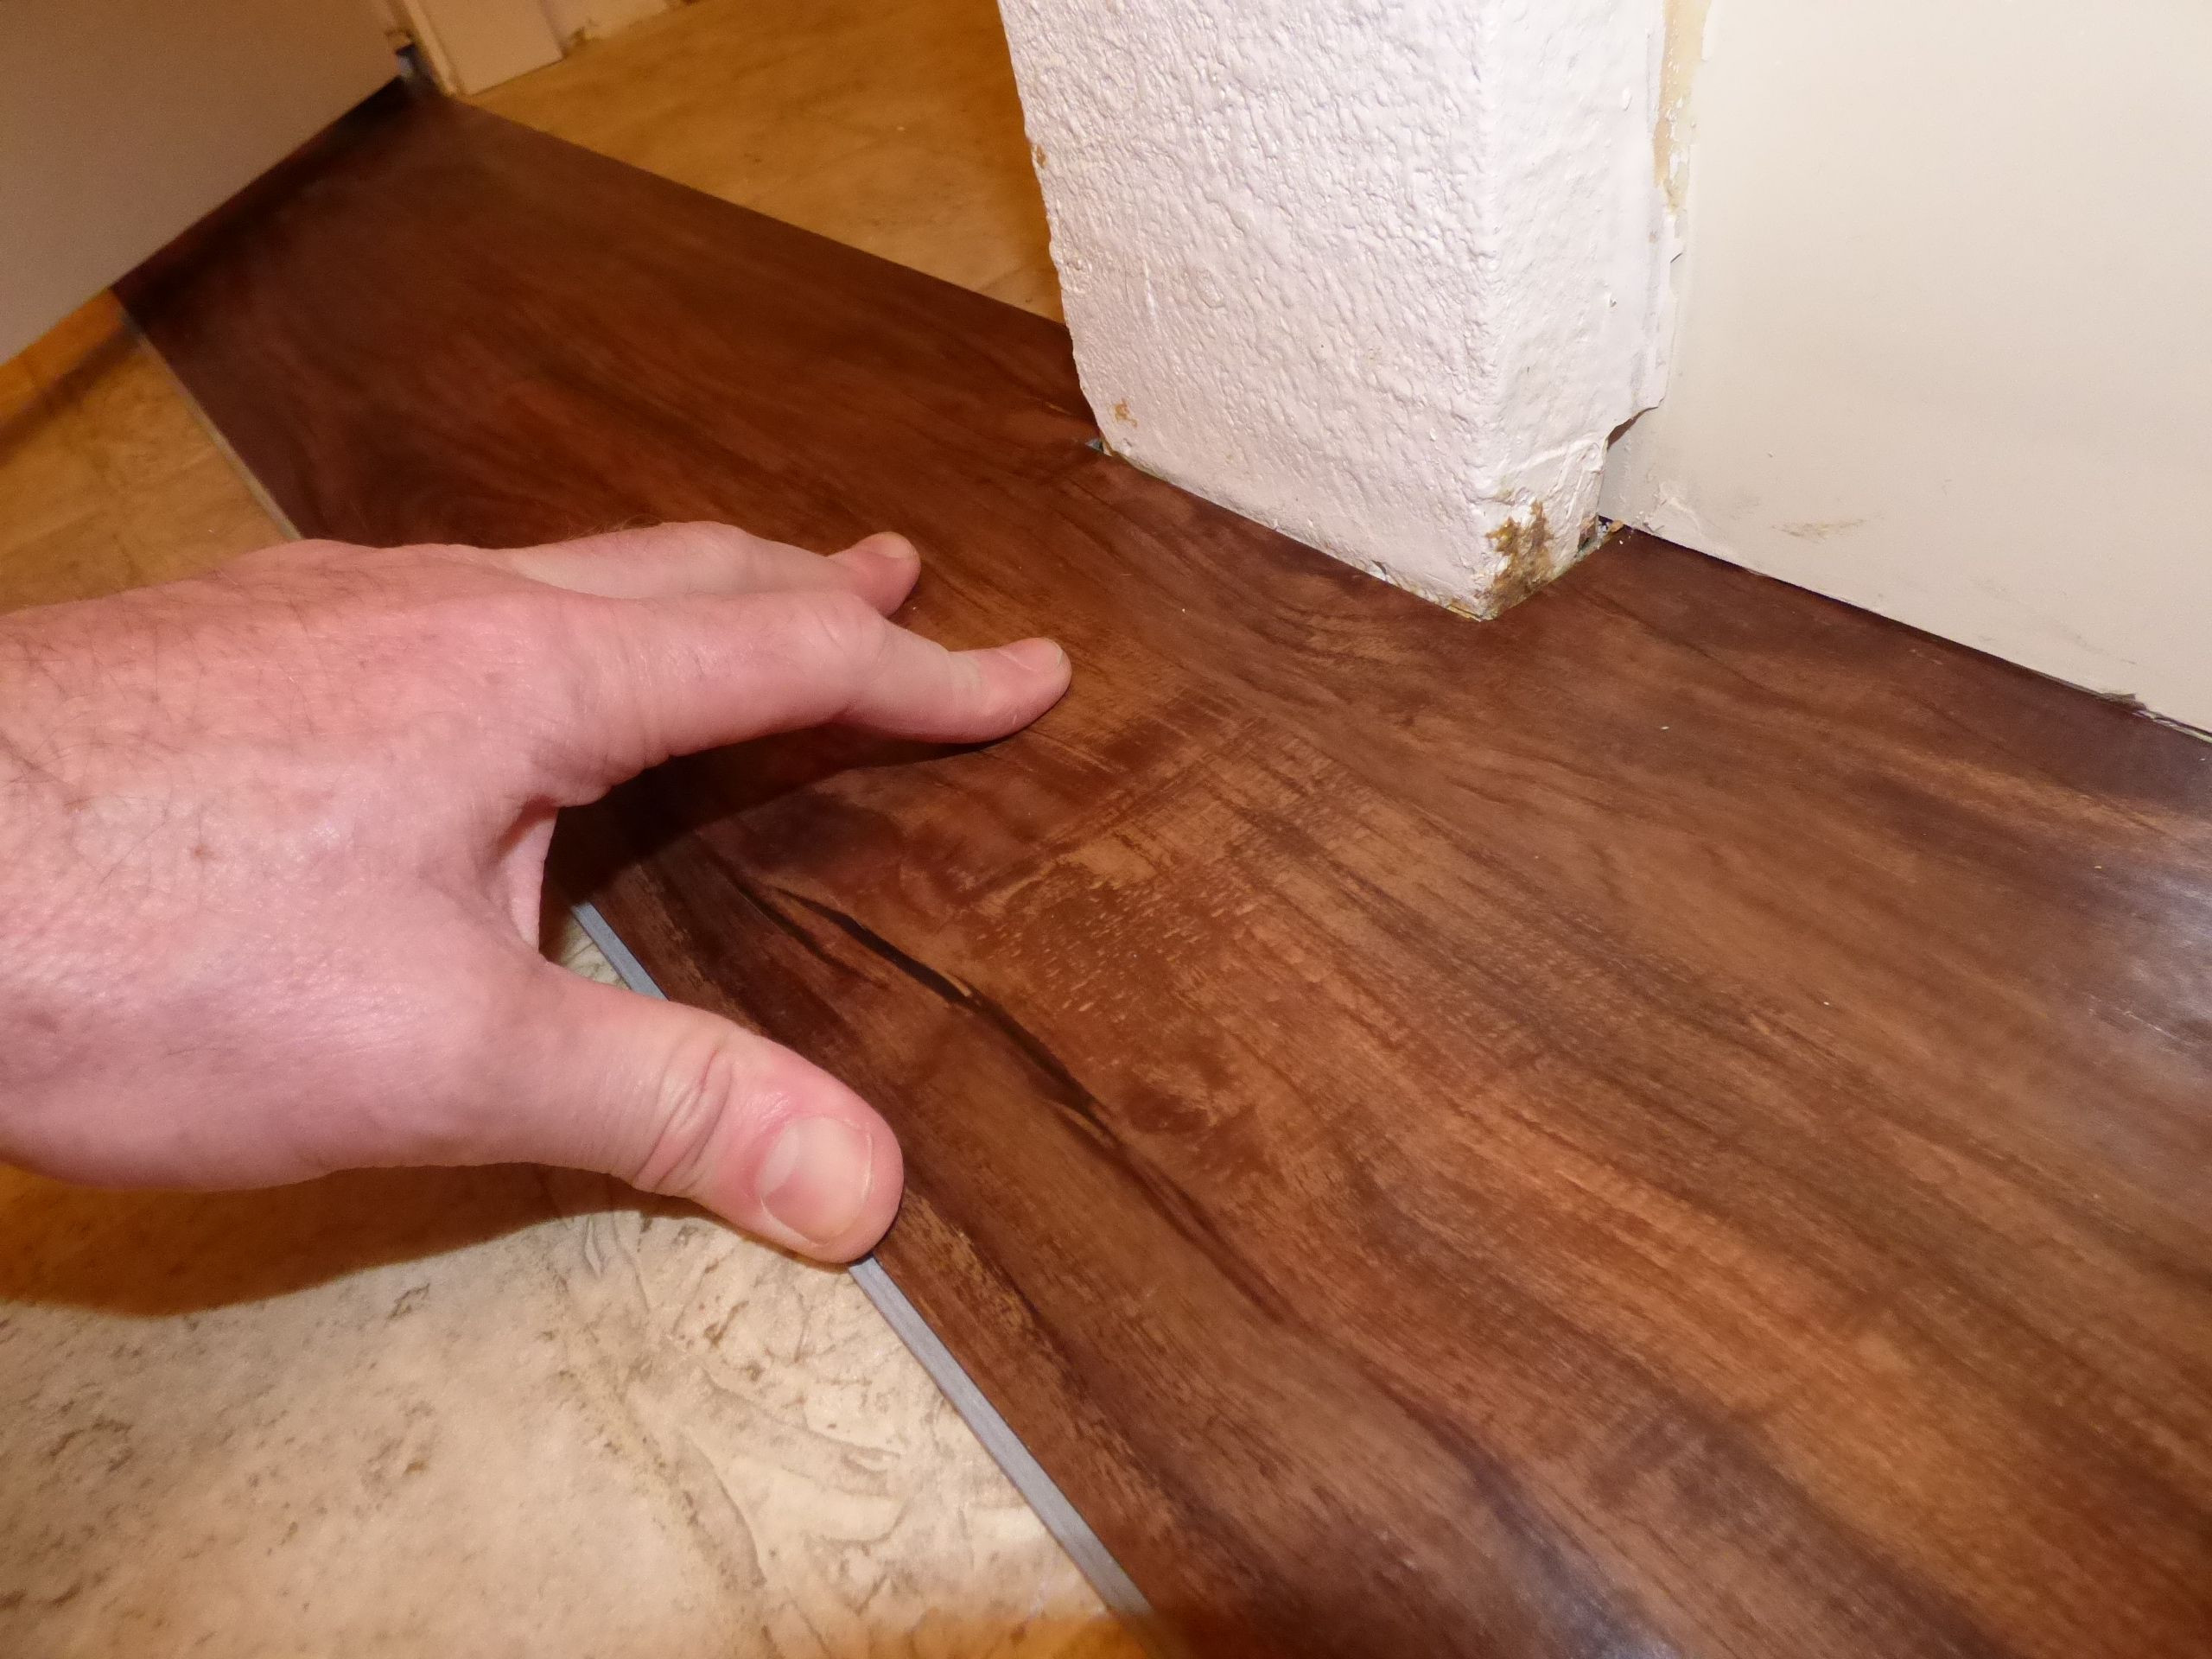 11 Spectacular How to Install Hardwood Floors without Nailer 2024 free download how to install hardwood floors without nailer of its easy and fast to install plank vinyl flooring throughout fitting plank around protrusions 56a4a04f3df78cf7728350a3 jpg